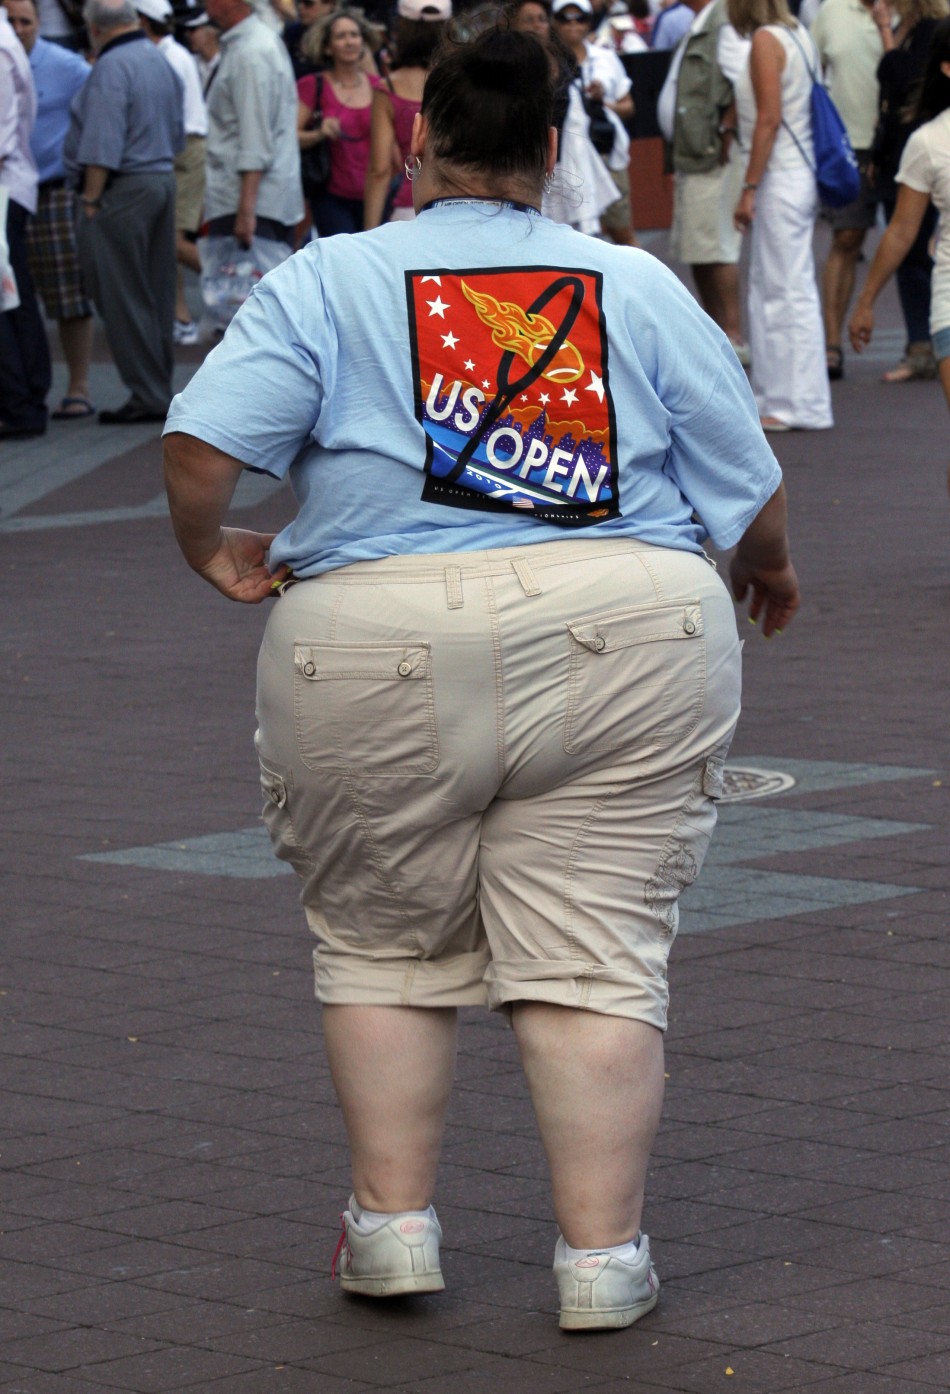 Over two thirds of Americans obese or overweight